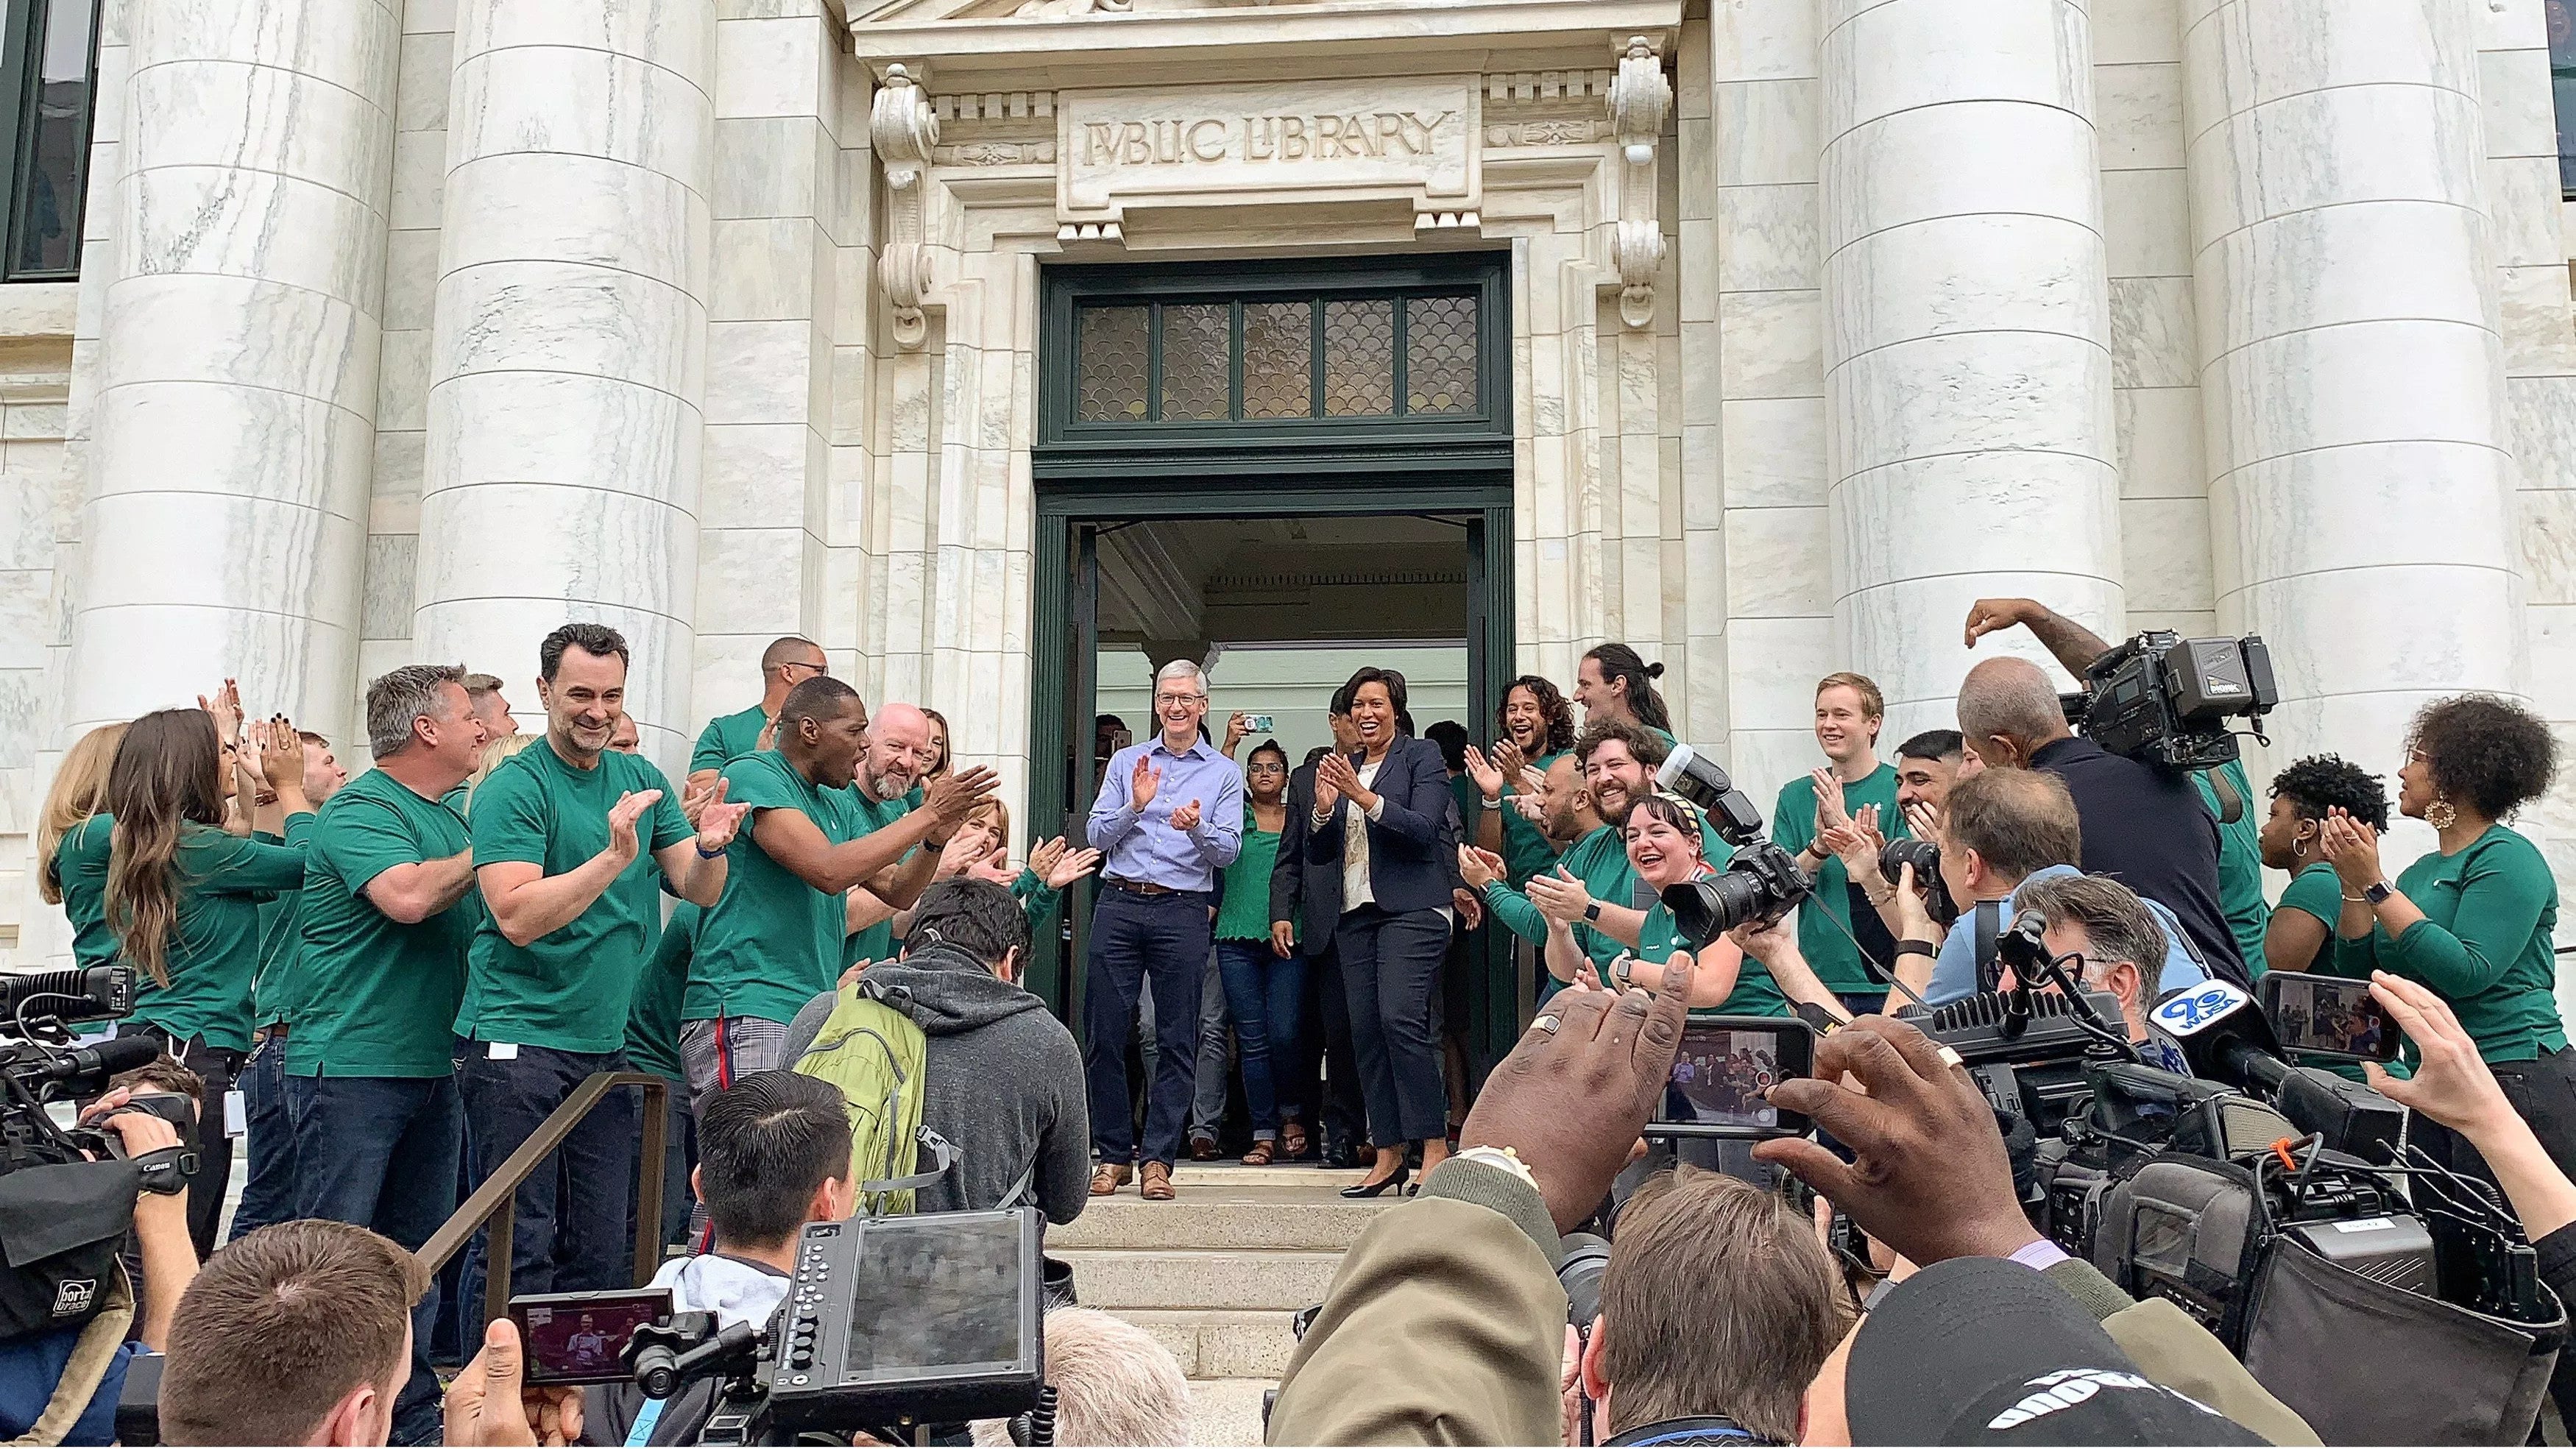 Apple opened its 505th store over the weekend, in&nbsp;the Carnegie Library in Washington D.C. - Has your experience at the Apple Stores worsened indeed?